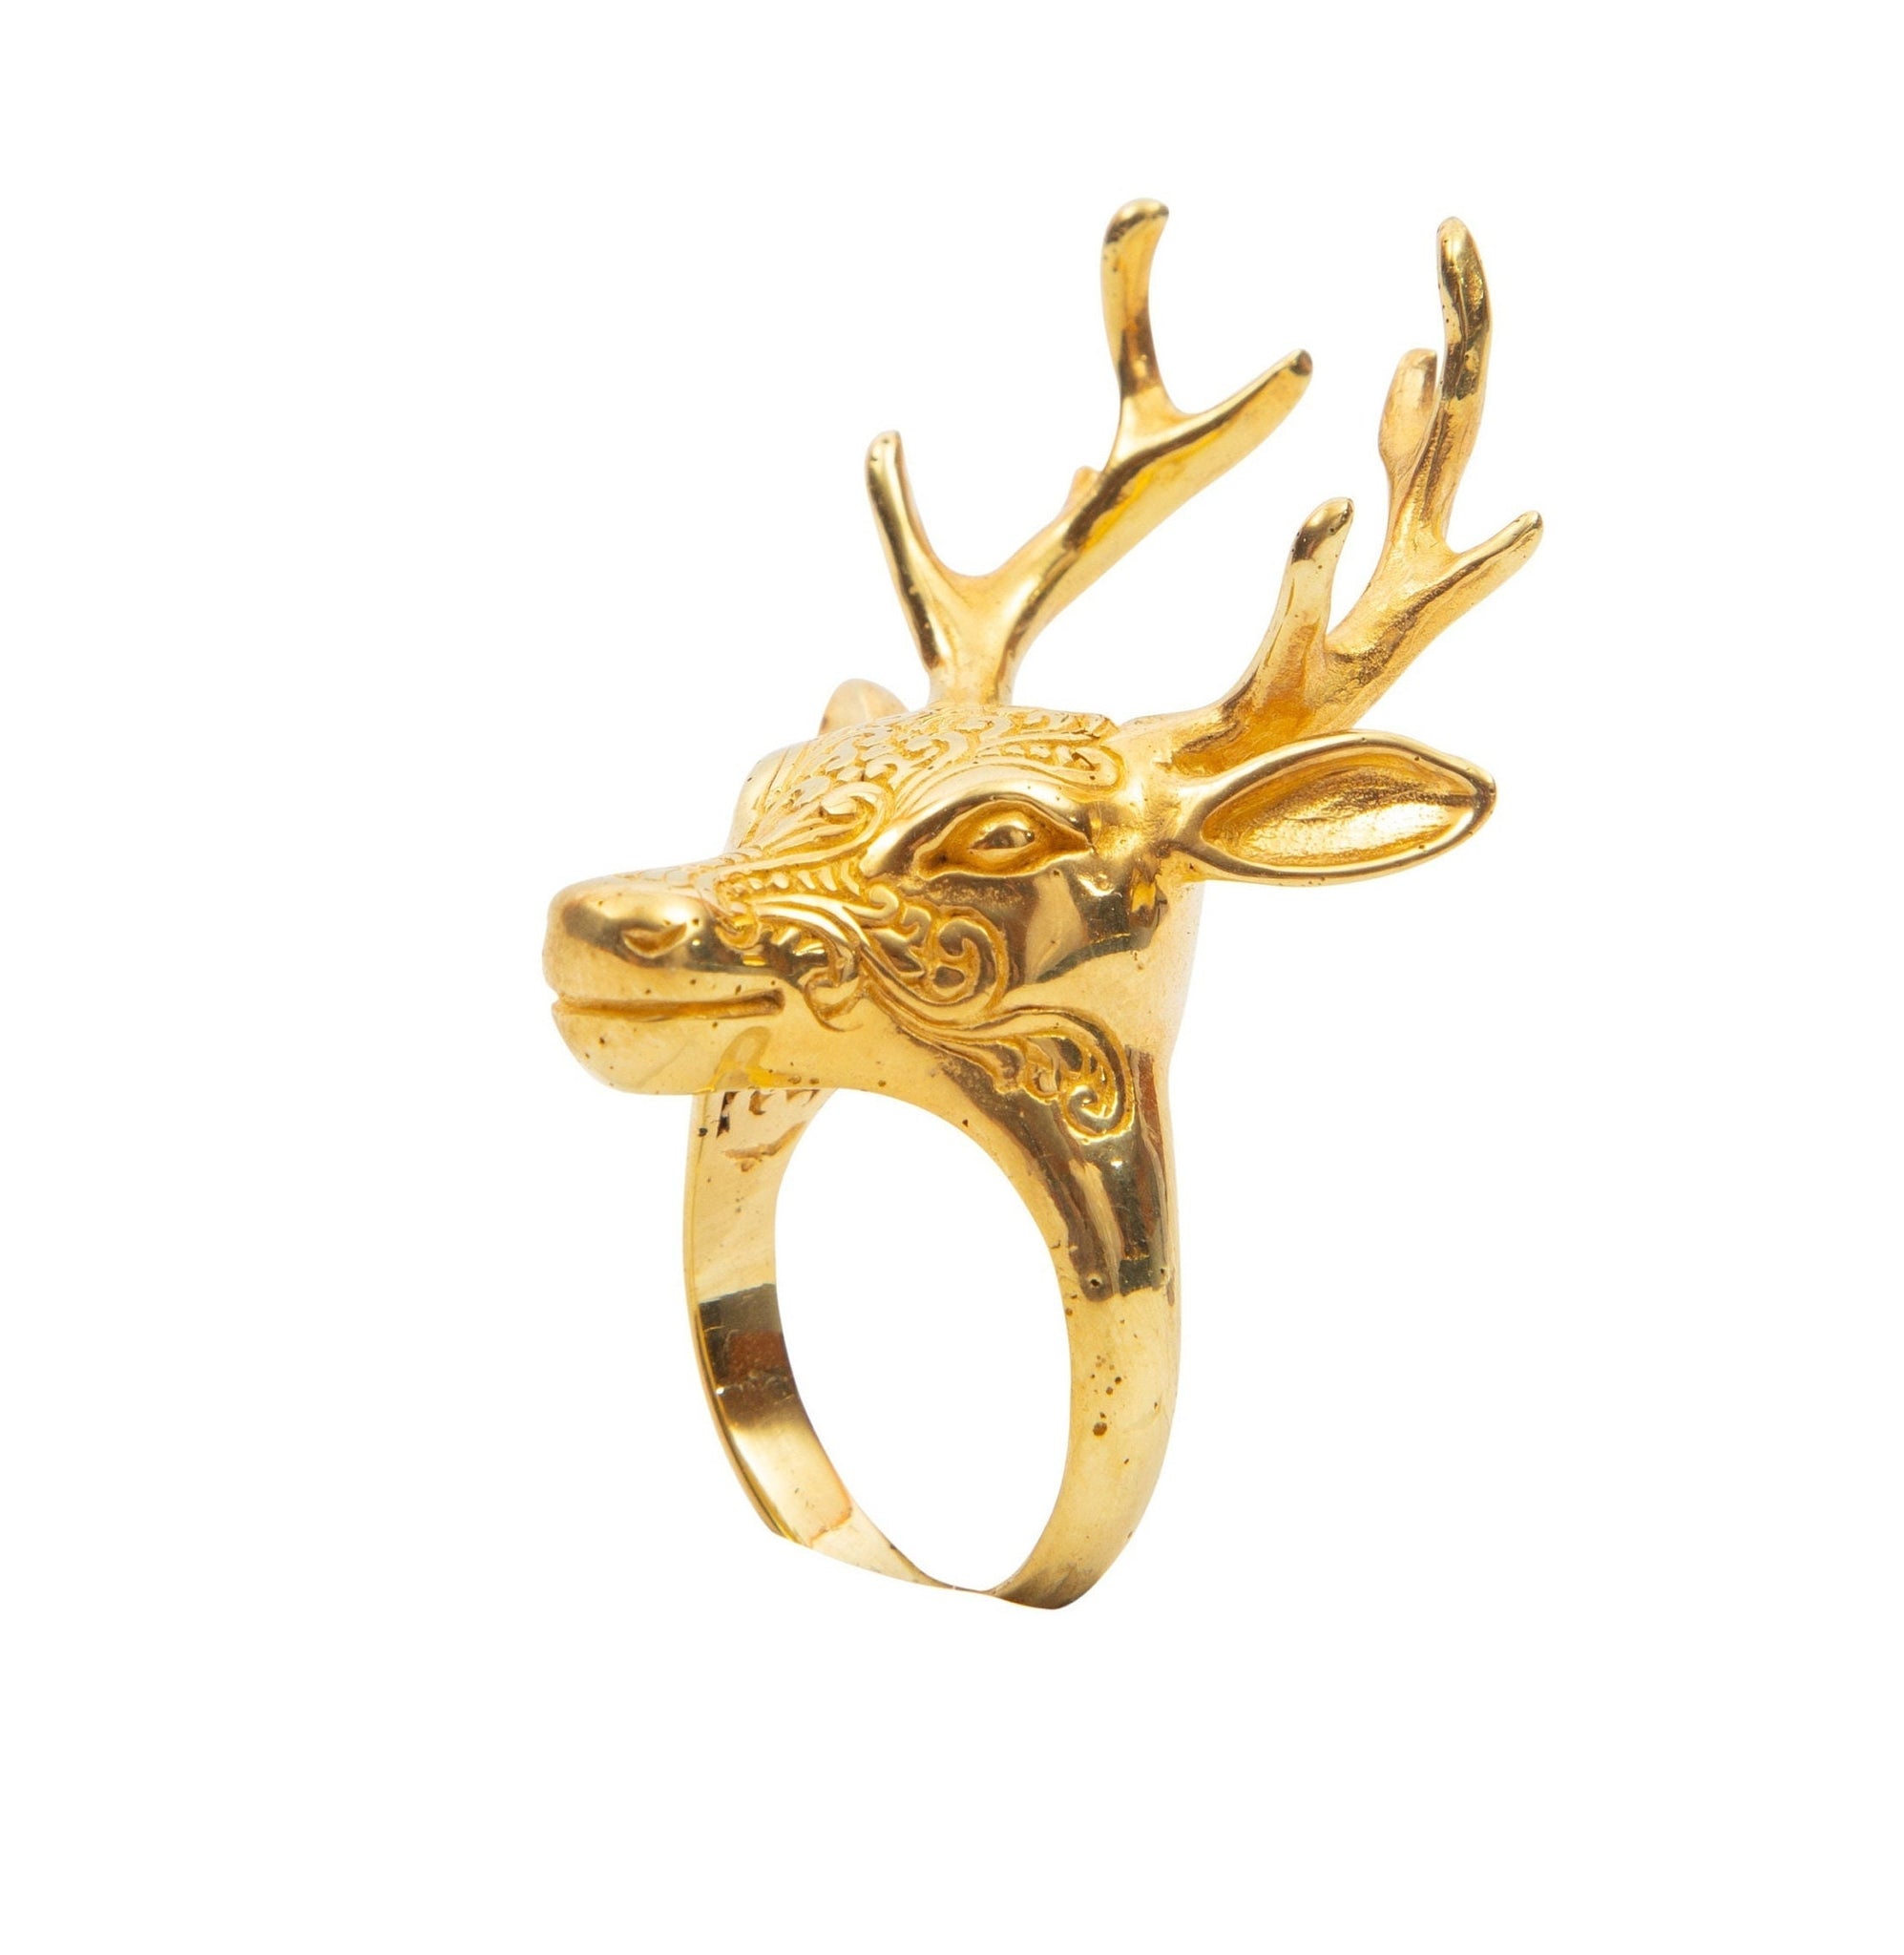 Stunning Stag Ring